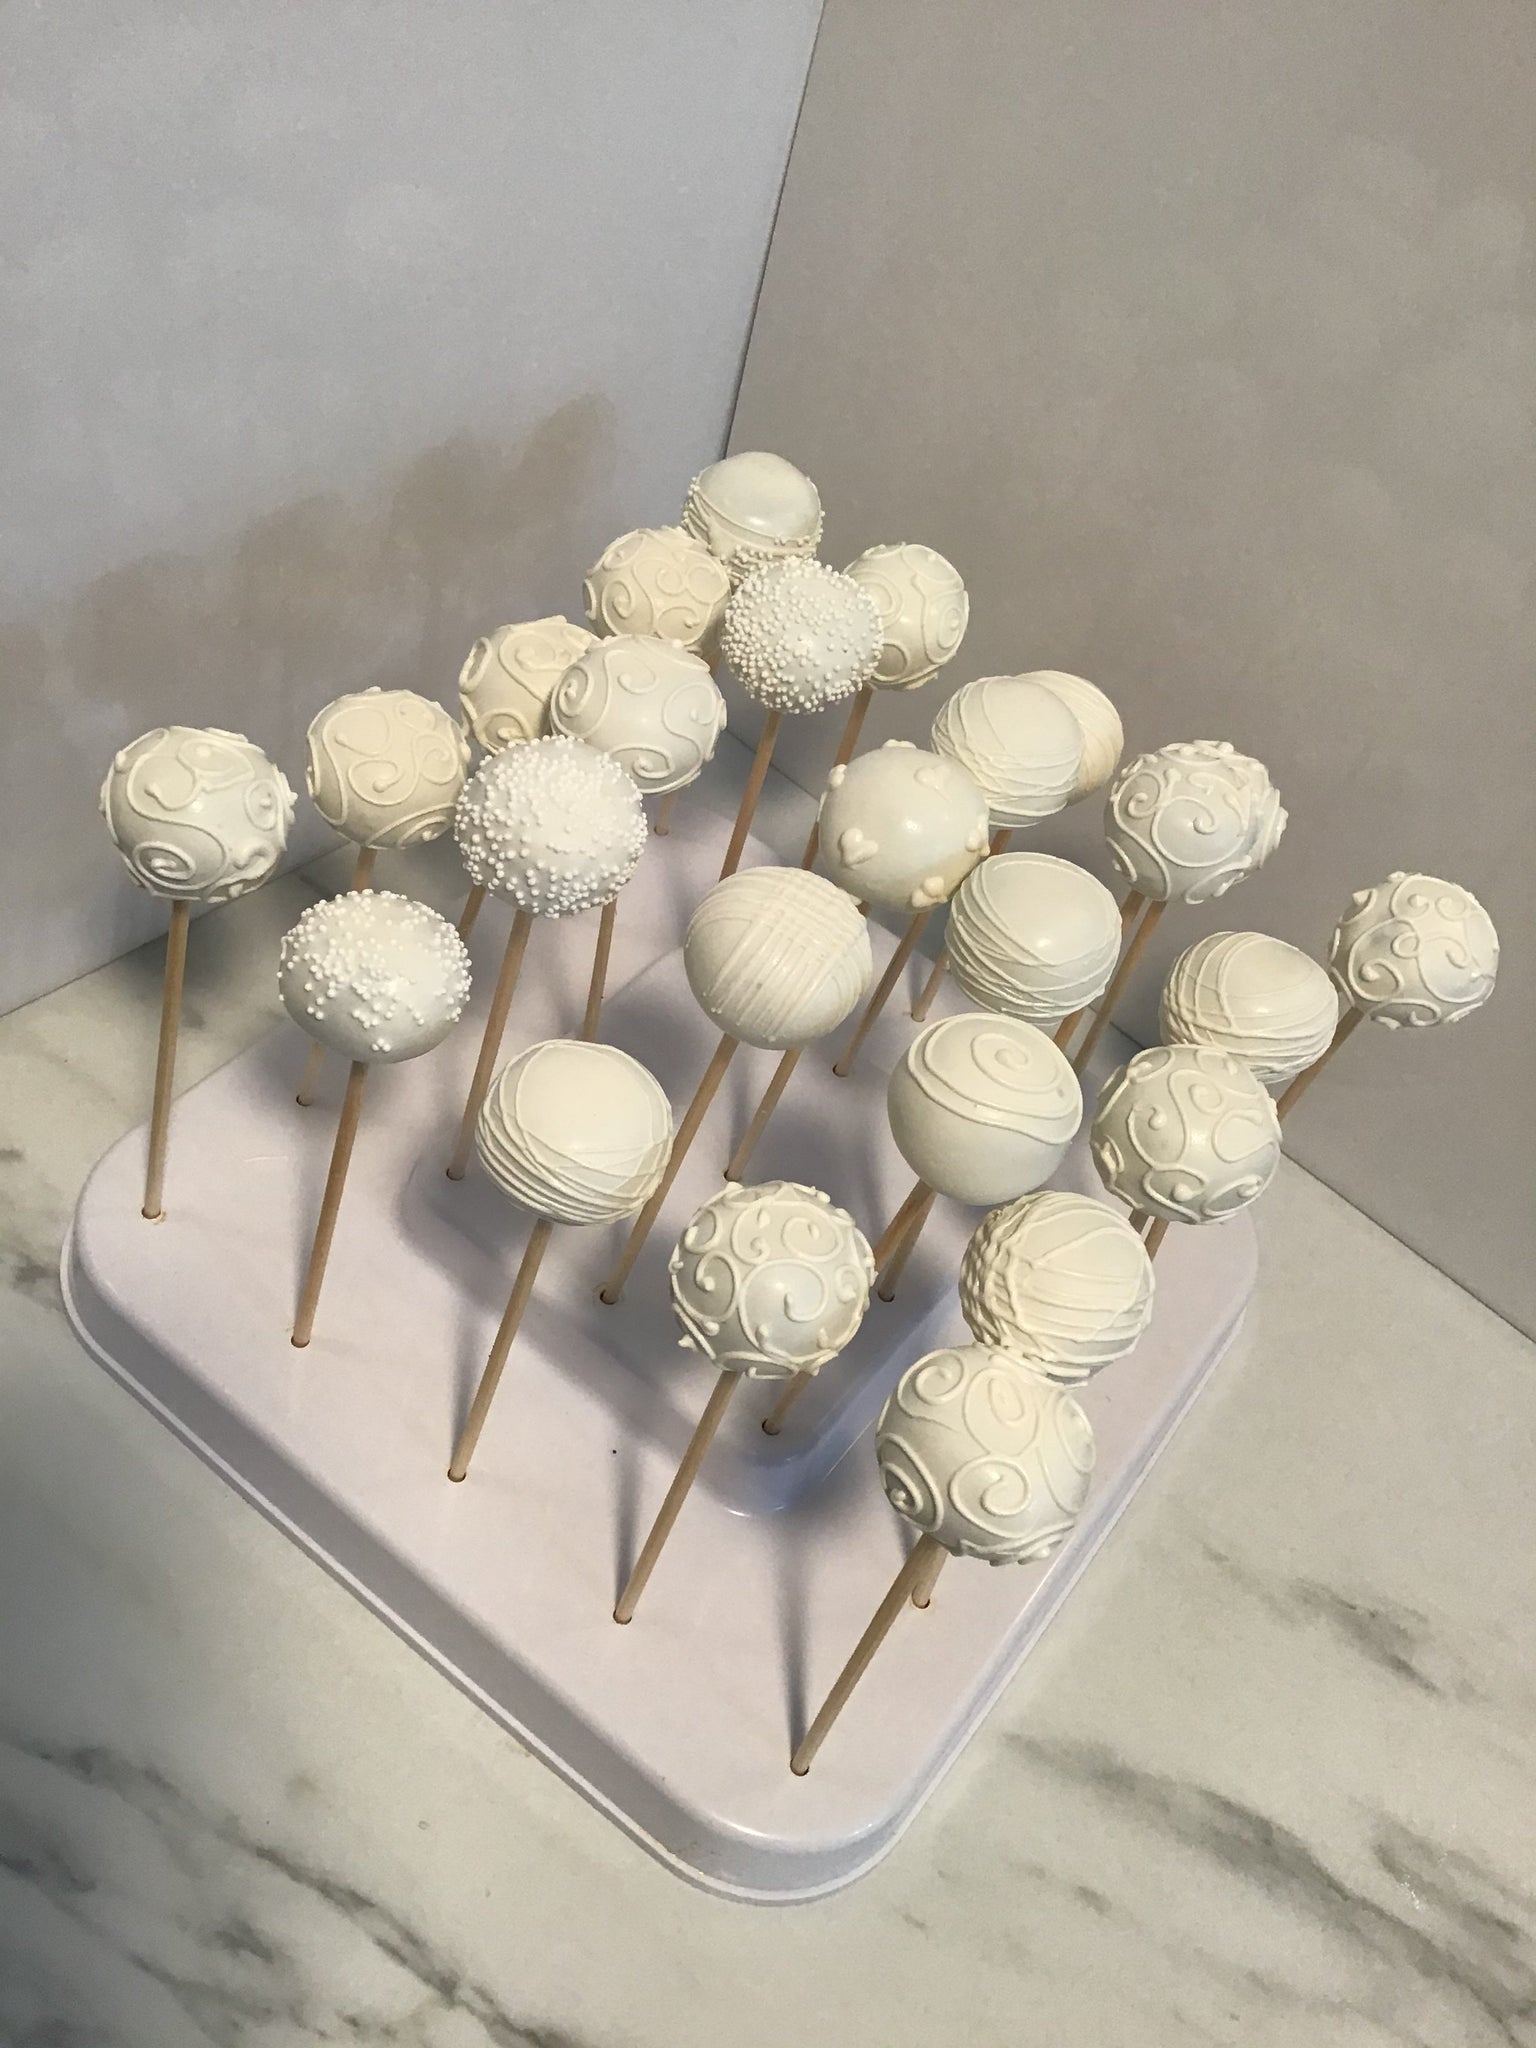 Cupcakes and Cake Pops on Silver Server